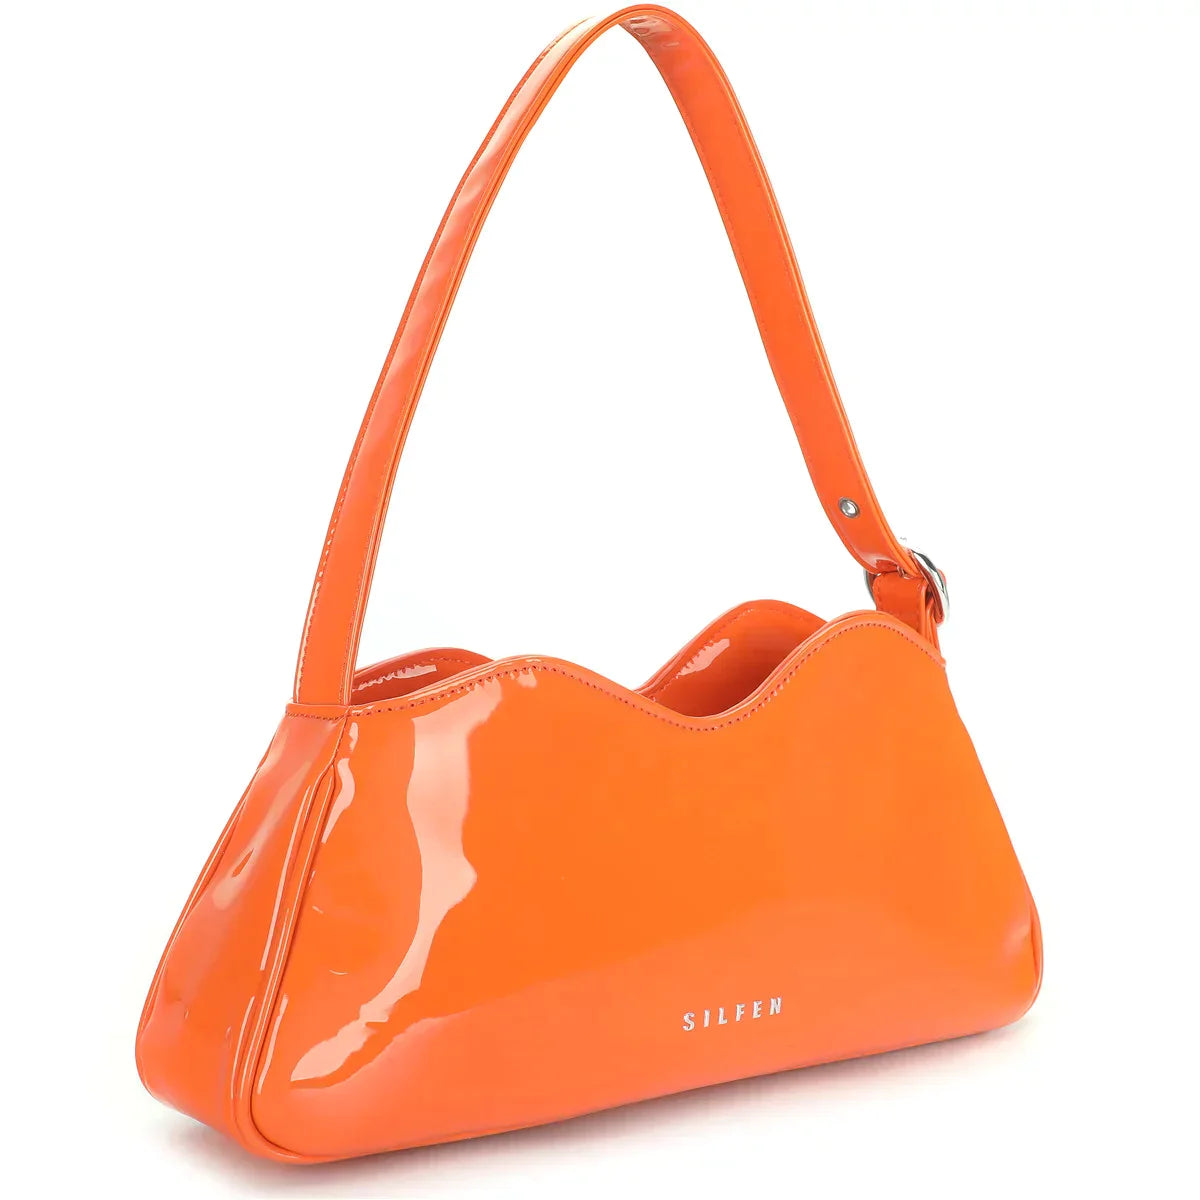 GRACE SHOULDER BAG - FLAME ORANGE - EXCLUSIVE Bags from SILFEN - Just €63! SHOP NOW AT IAMINHATELOVE BOTH IN STORE FOR CYPRUS AND ONLINE WORLDWIDE @ IAMINHATELOVE.COM